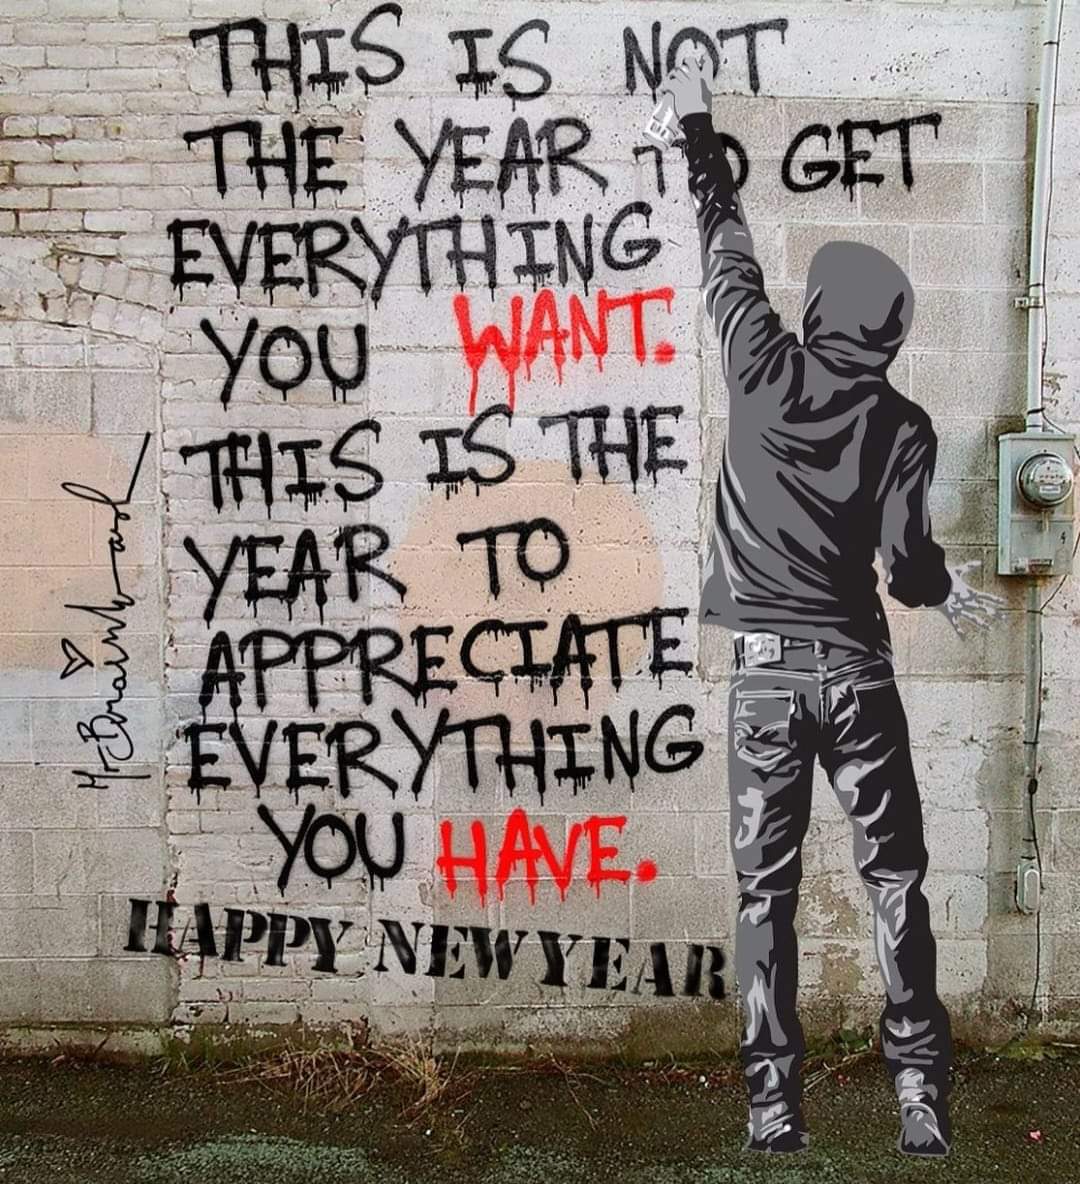 #StreetArt and #NewYear2024 Wish you all the best!🫶 #staysafe
#TheWallsAreSpeaking